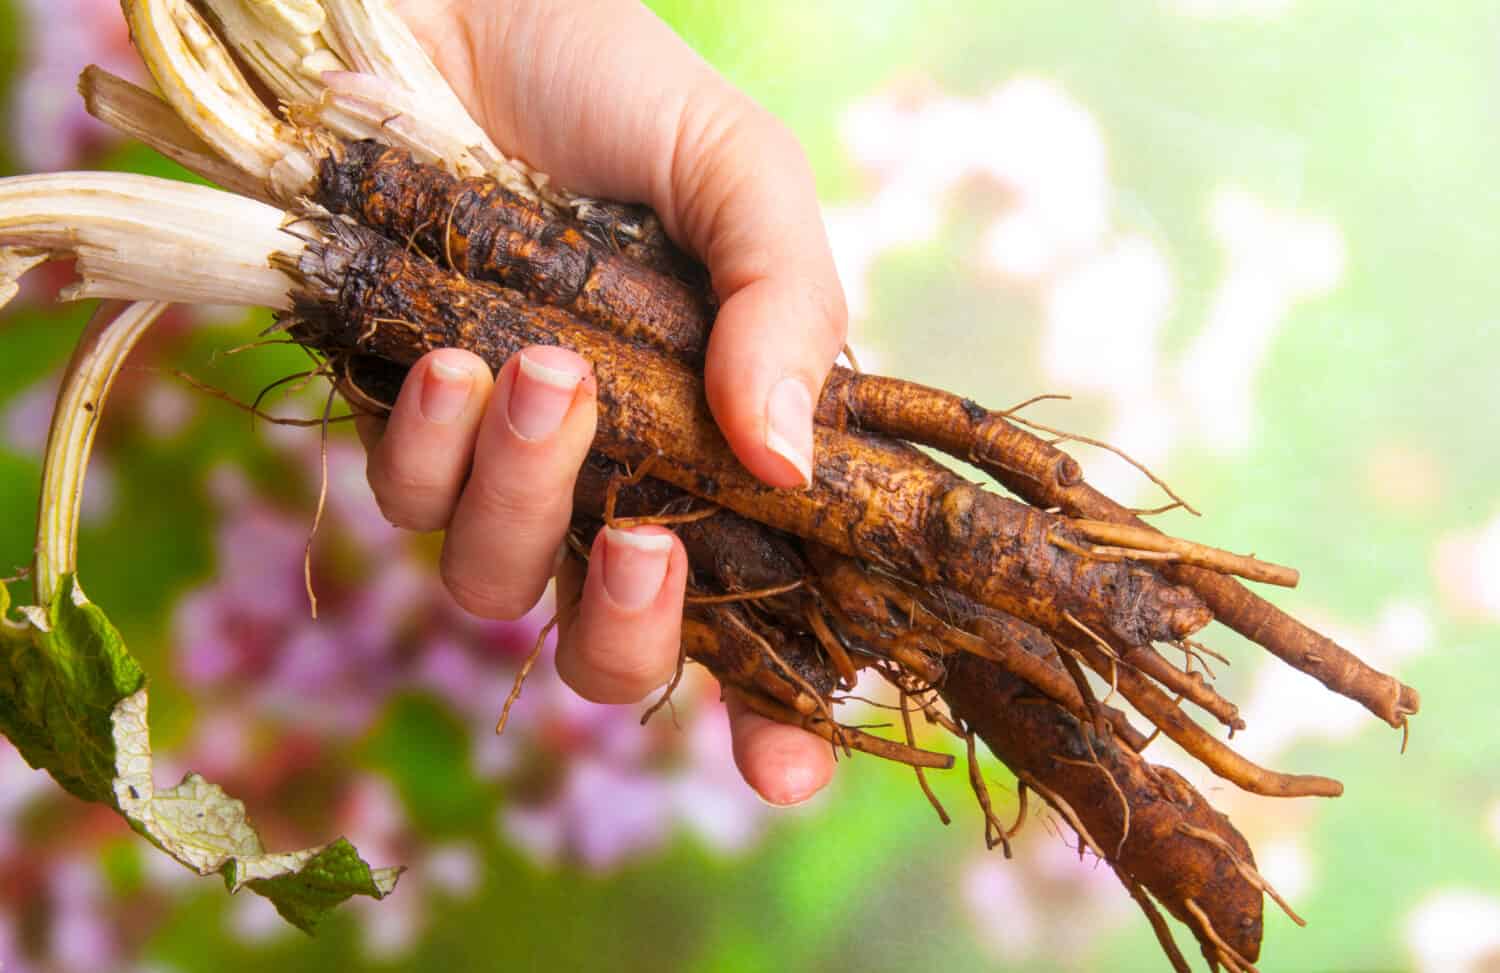 Roots and leaves of burdock (Arctium lappa) in woman's hand.The taproot of young burdock plants can be harvested and eaten as a root vegetable.